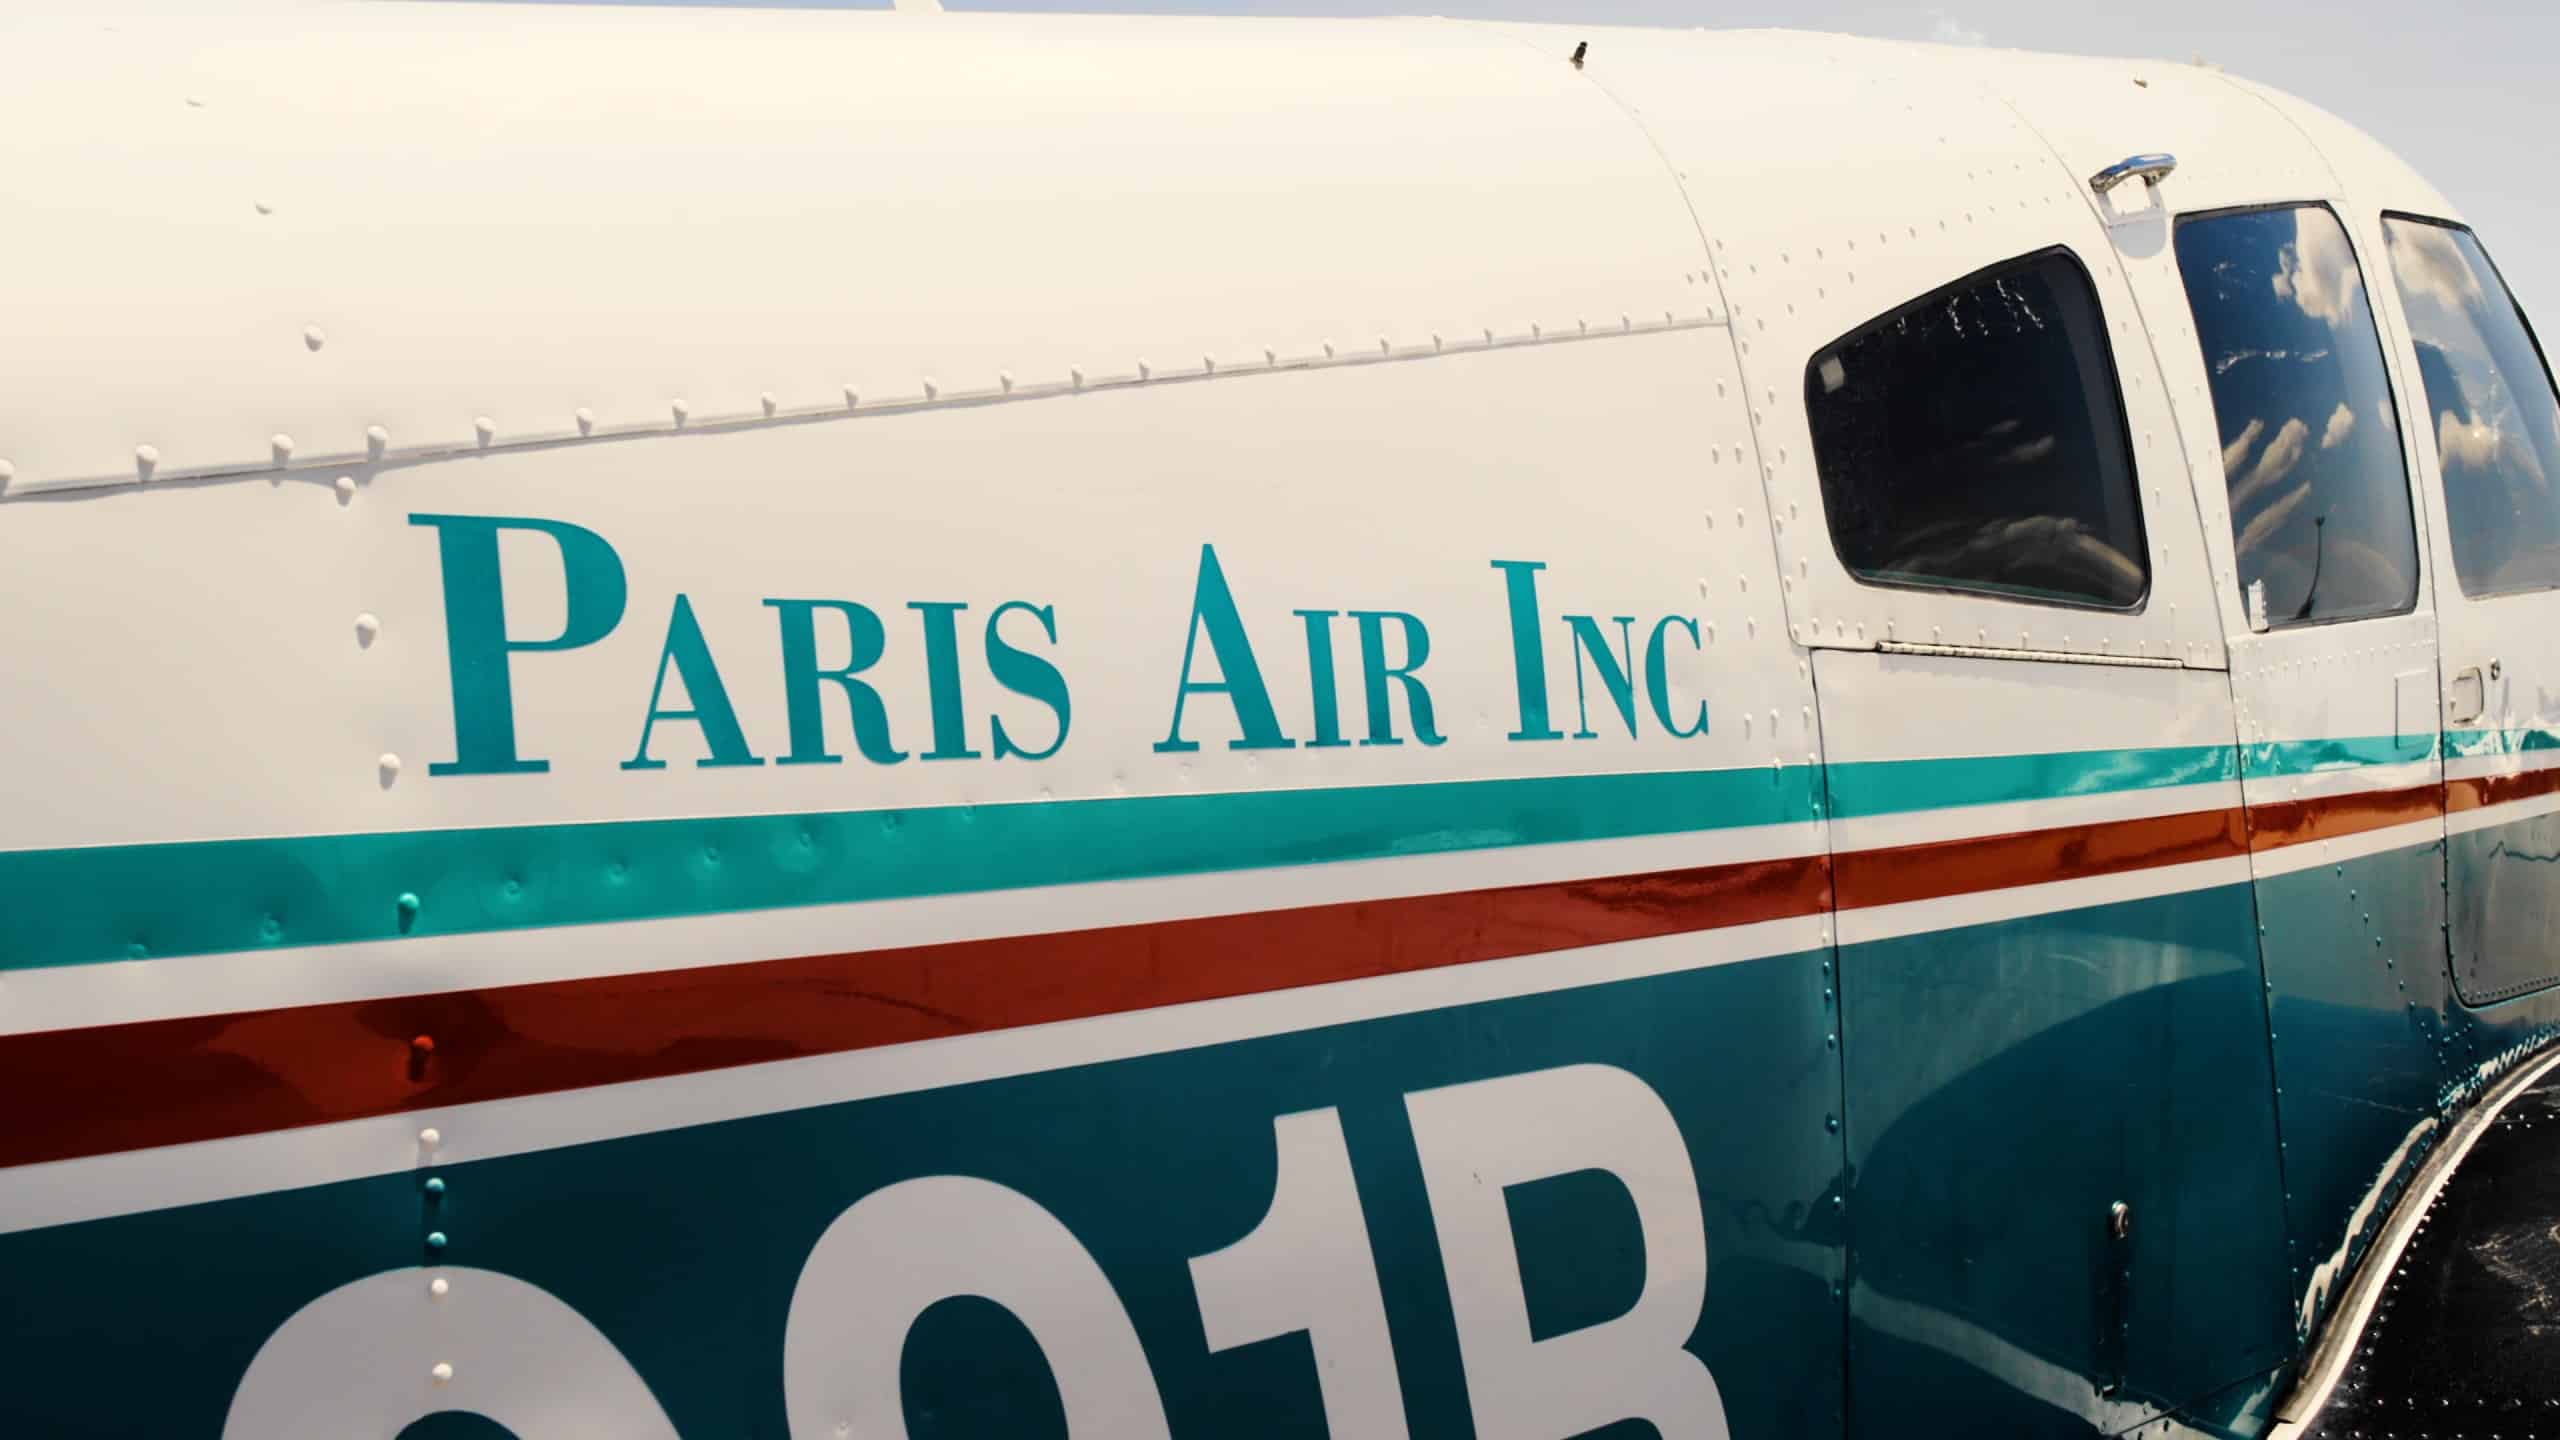 Closeup of the Paris Air Inc name on the side of a small airplane